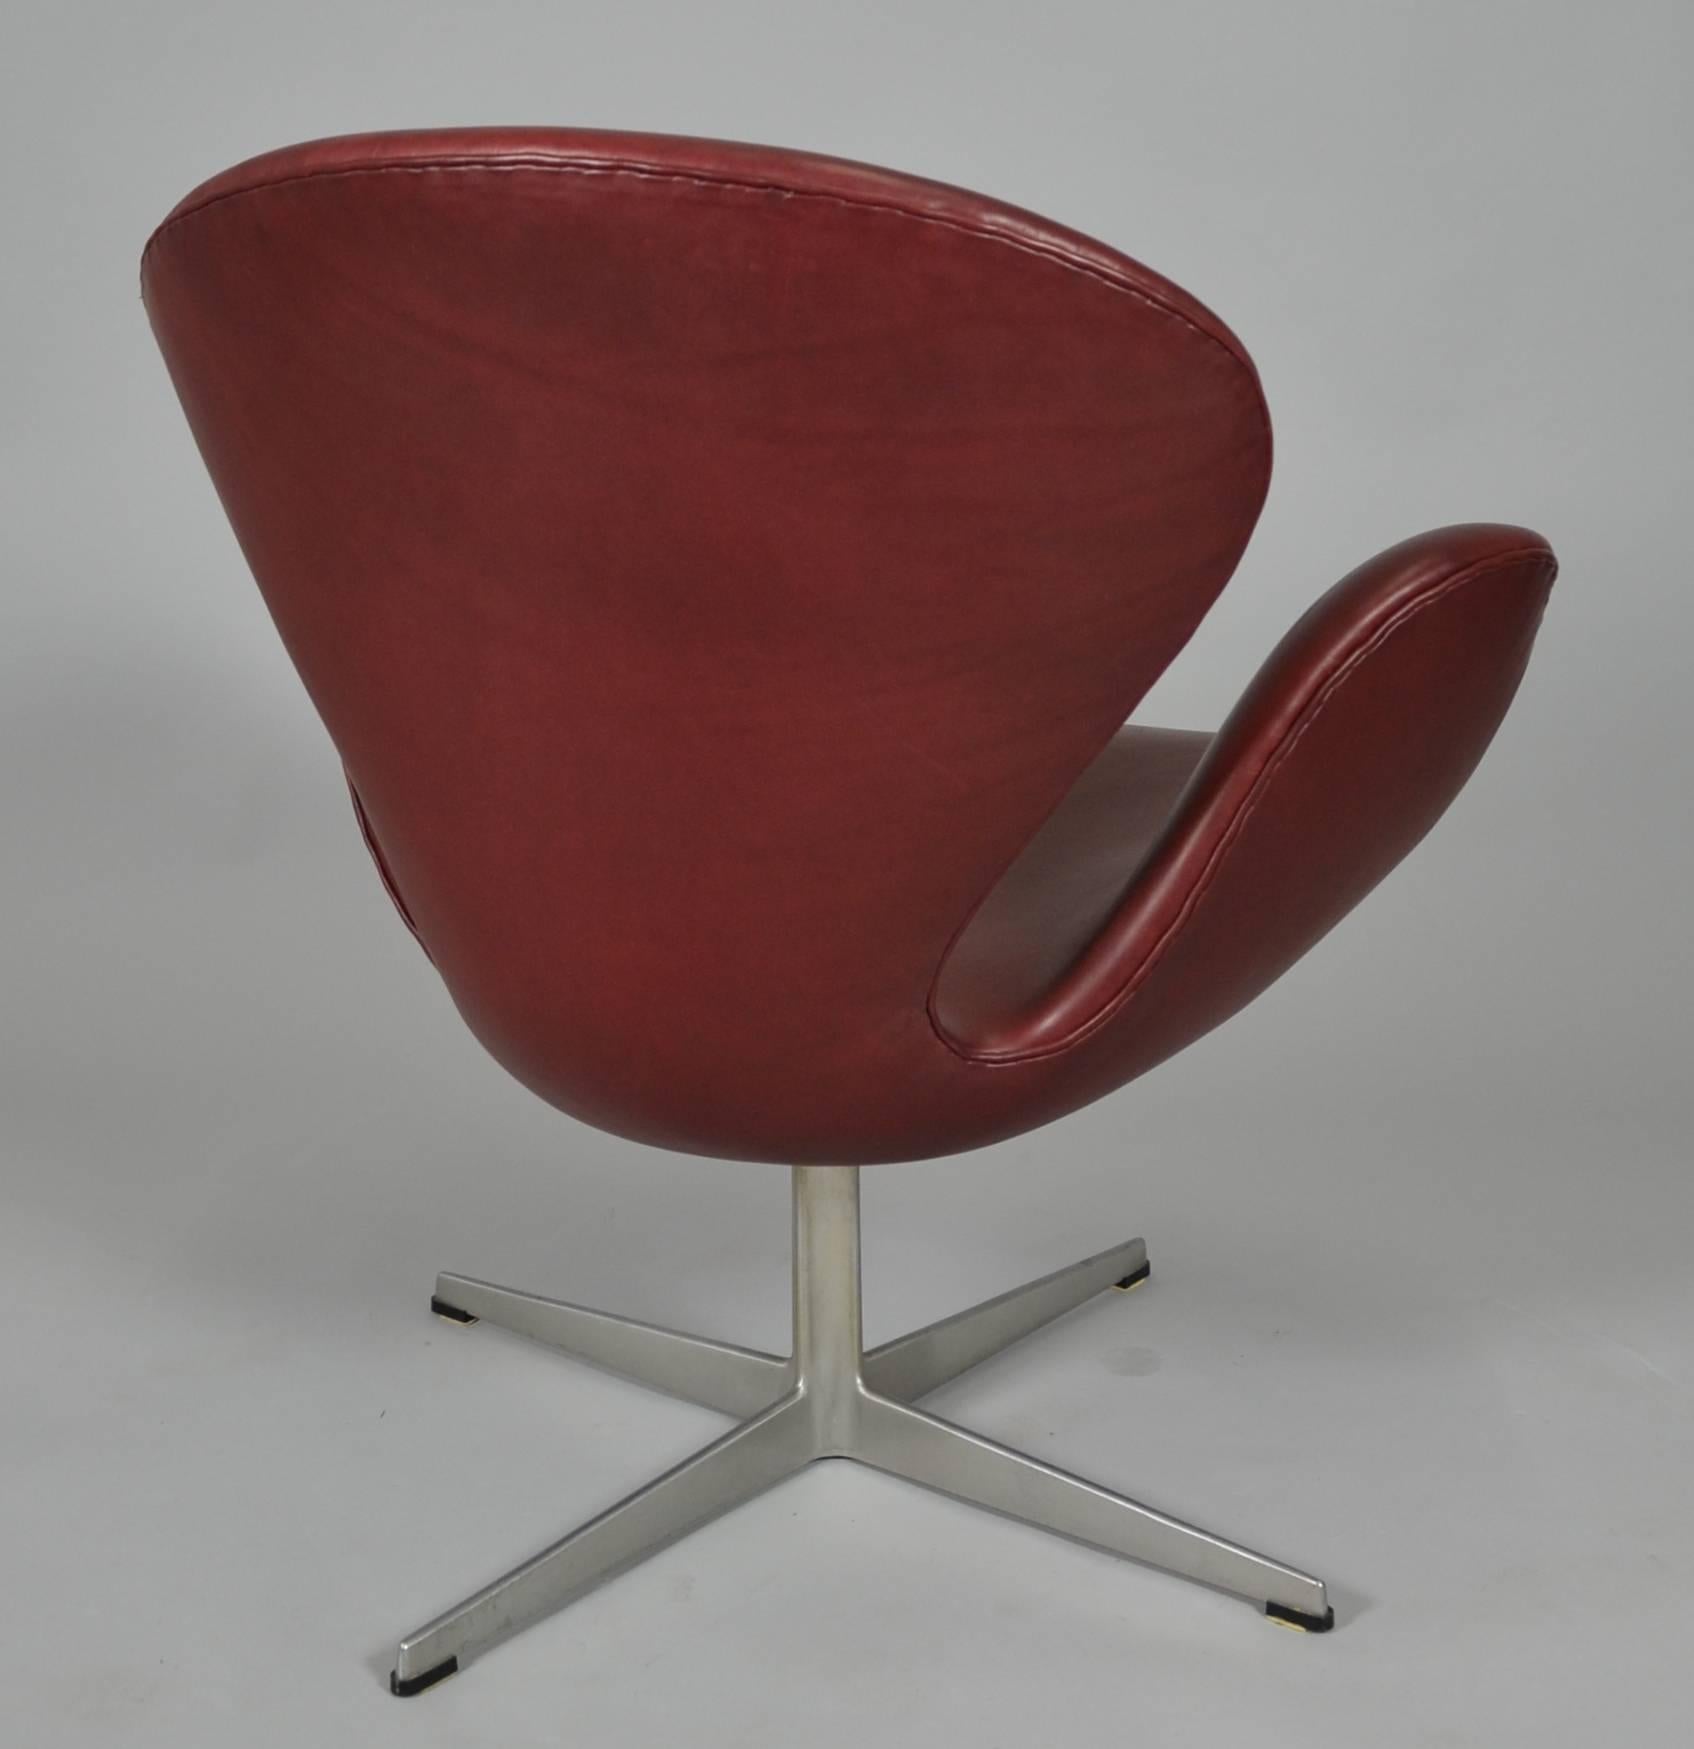 Mid-20th Century Pair of Swan Chairs by Arne Jacobsen in Bordeaux Leather